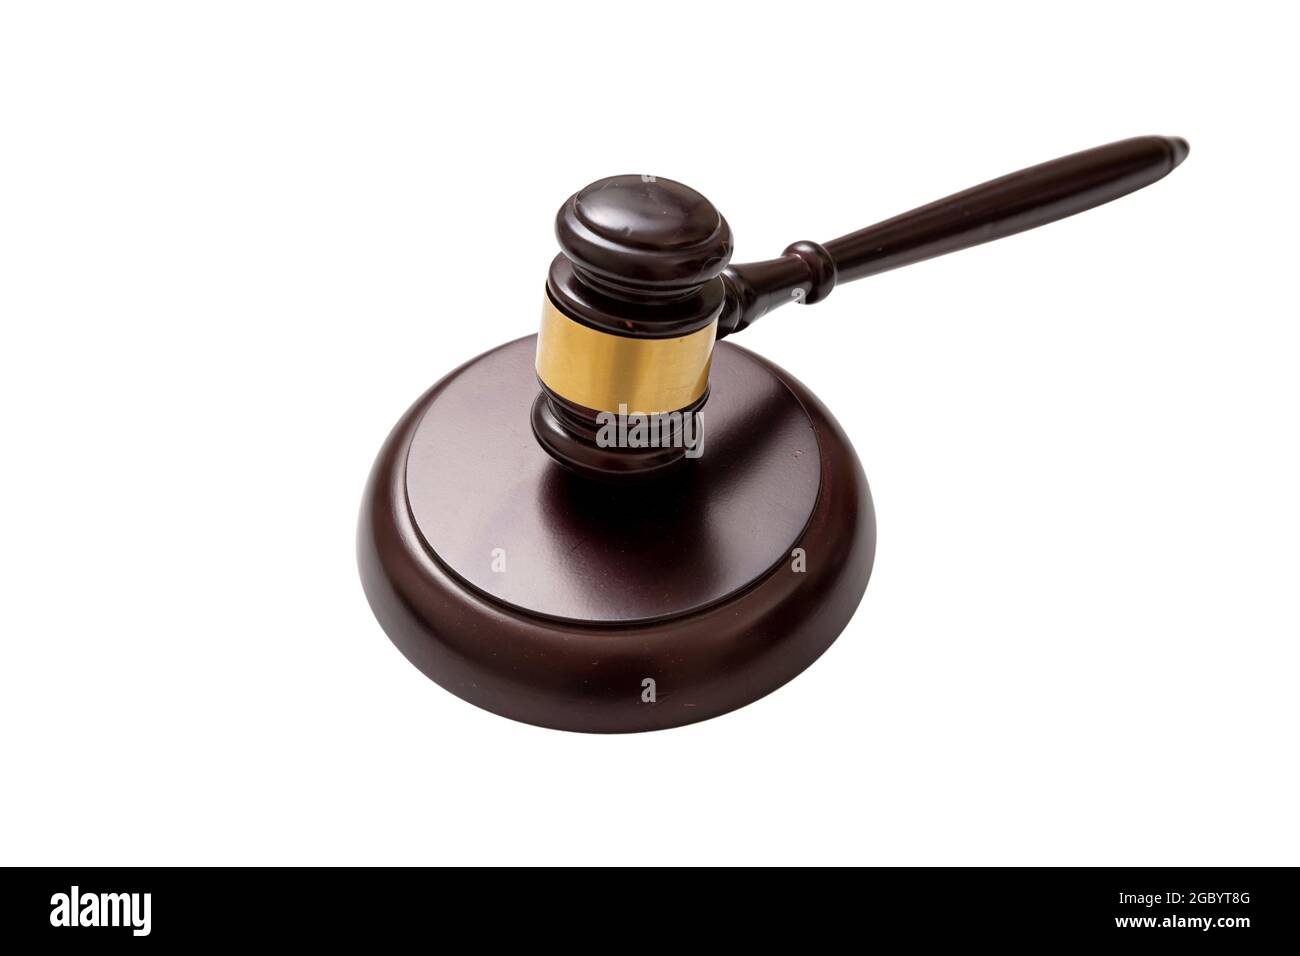 Judge gavel isolated cutout on white background, Law court or auction concept, Wooden mallet, justice system sign and symbol Stock Photo